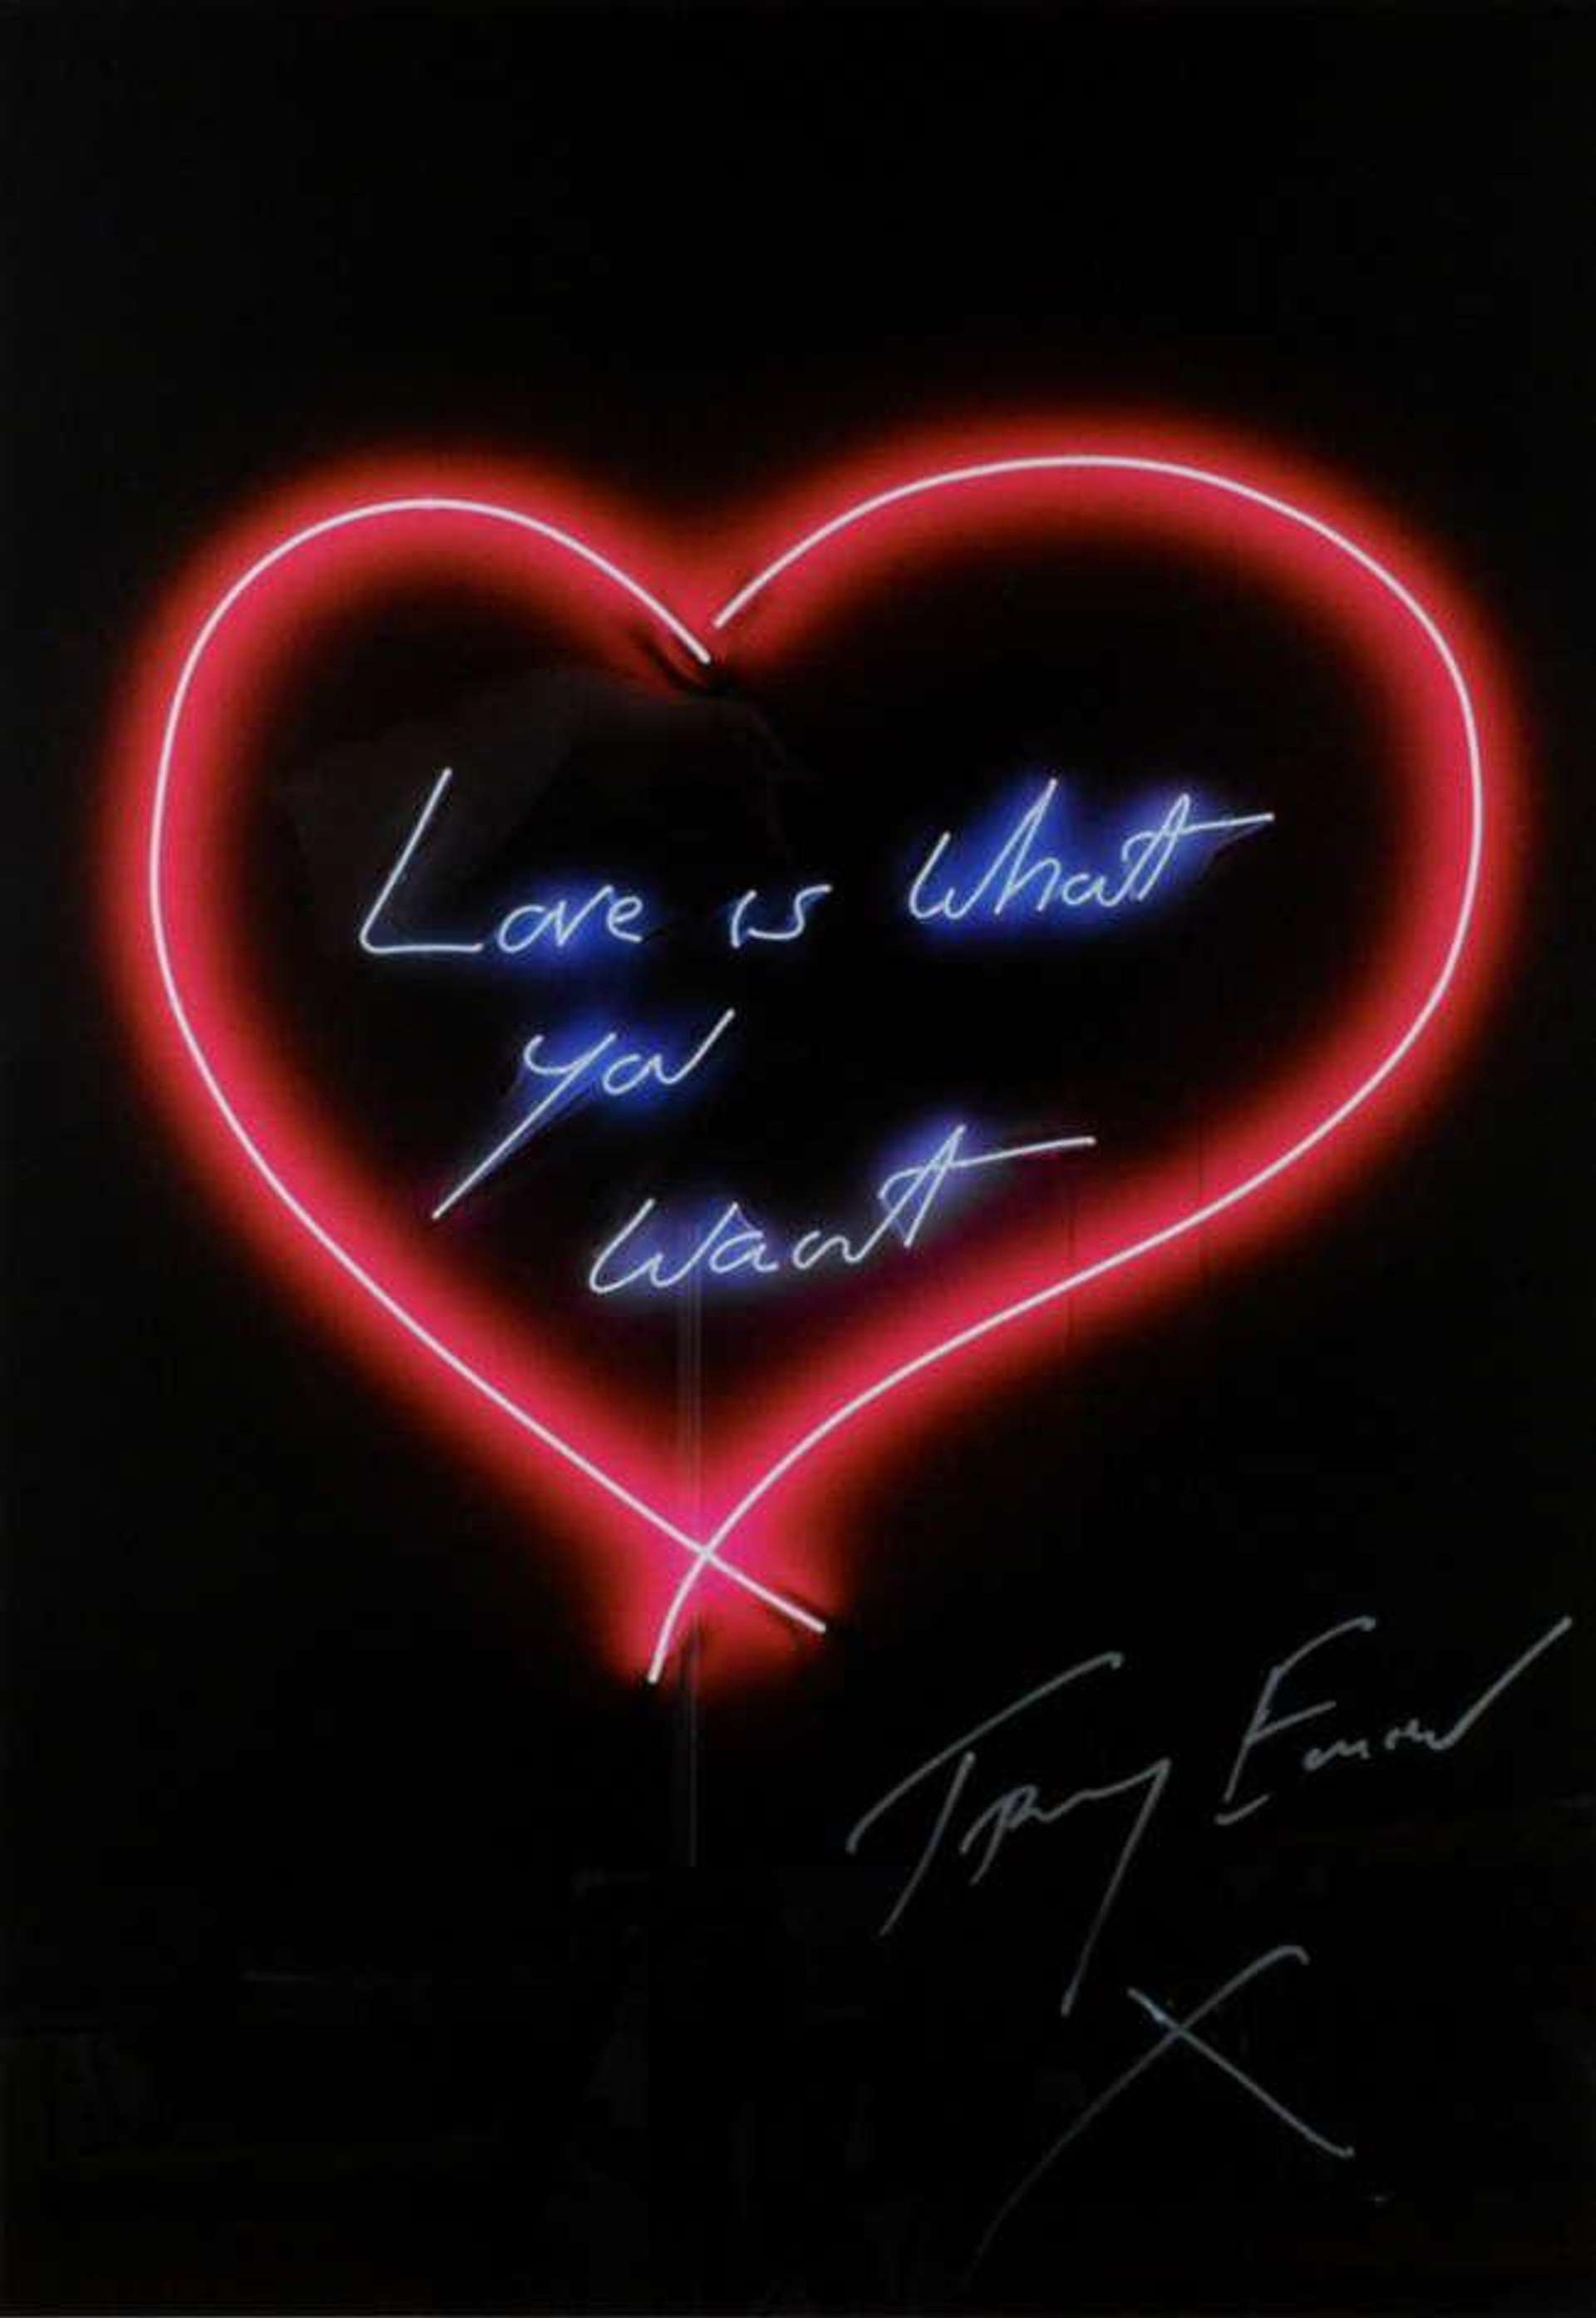 Tracey Emin’s Love Is What You Want. A print of a neon heart in red with the text inside that reads “love is what you want”